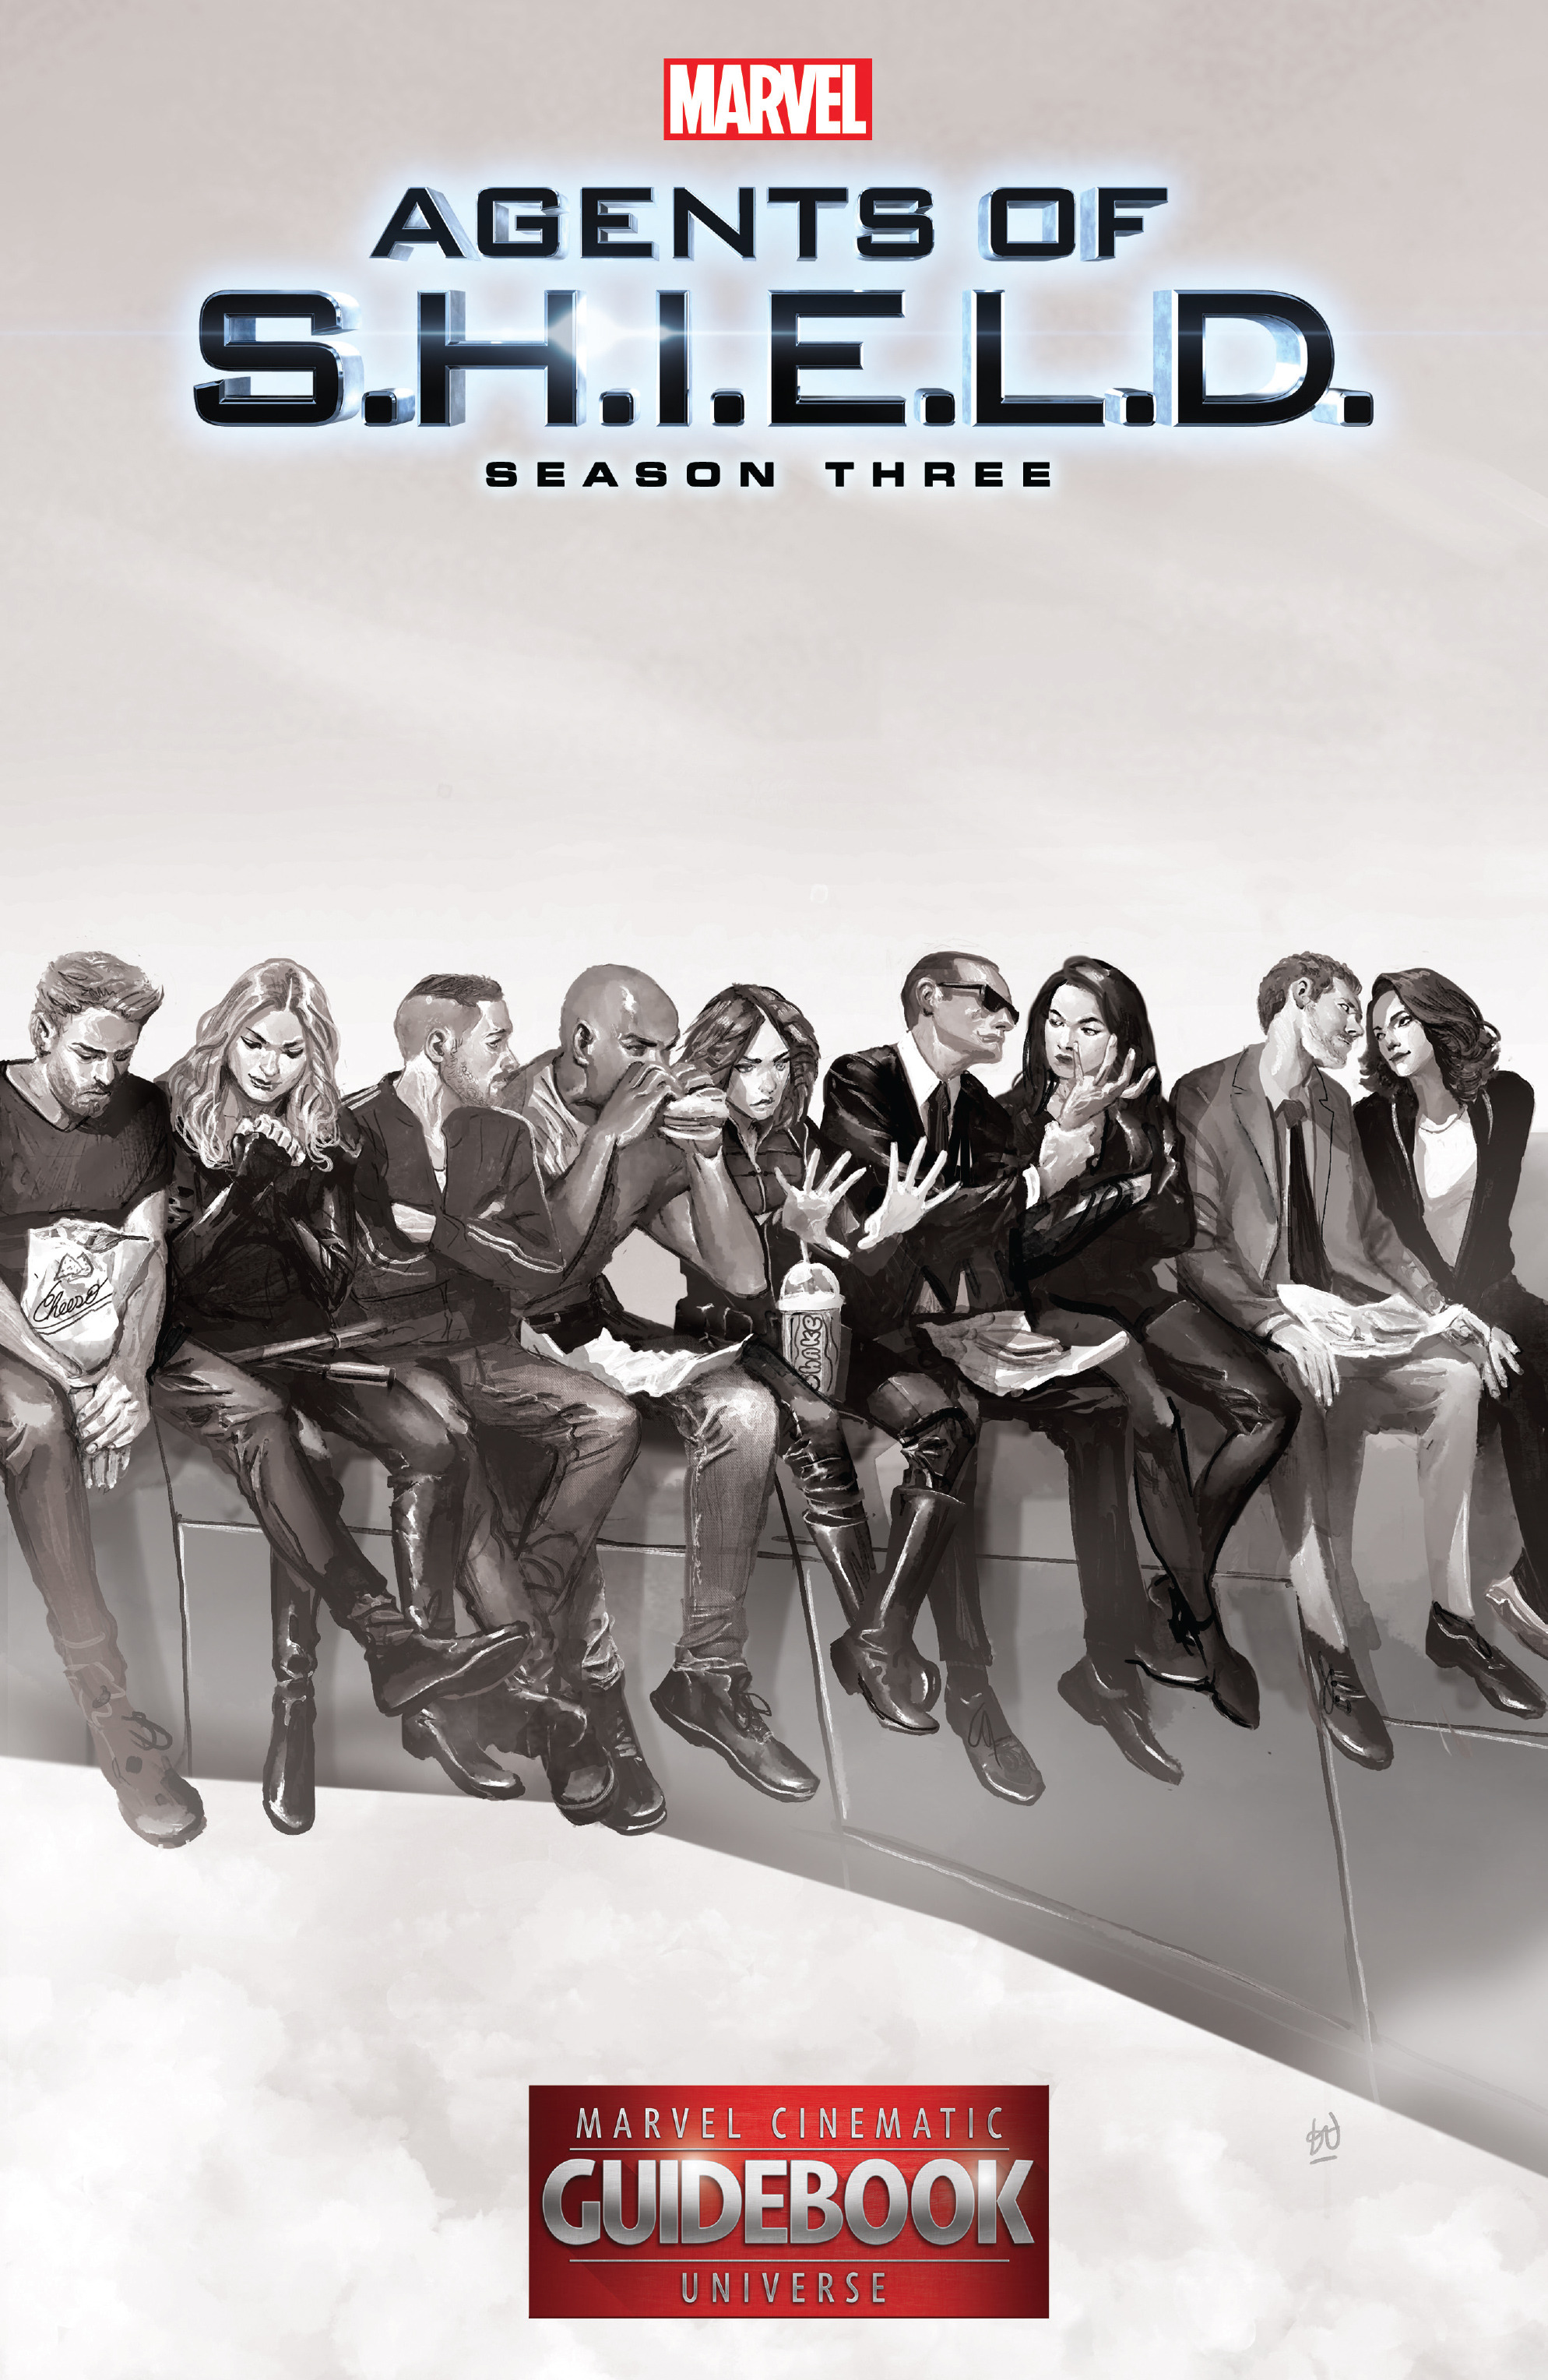 Read online Guidebook to the Marvel Cinematic Universe - Marvel's Agents of S.H.I.E.L.D. Season Three comic -  Issue # Full - 1